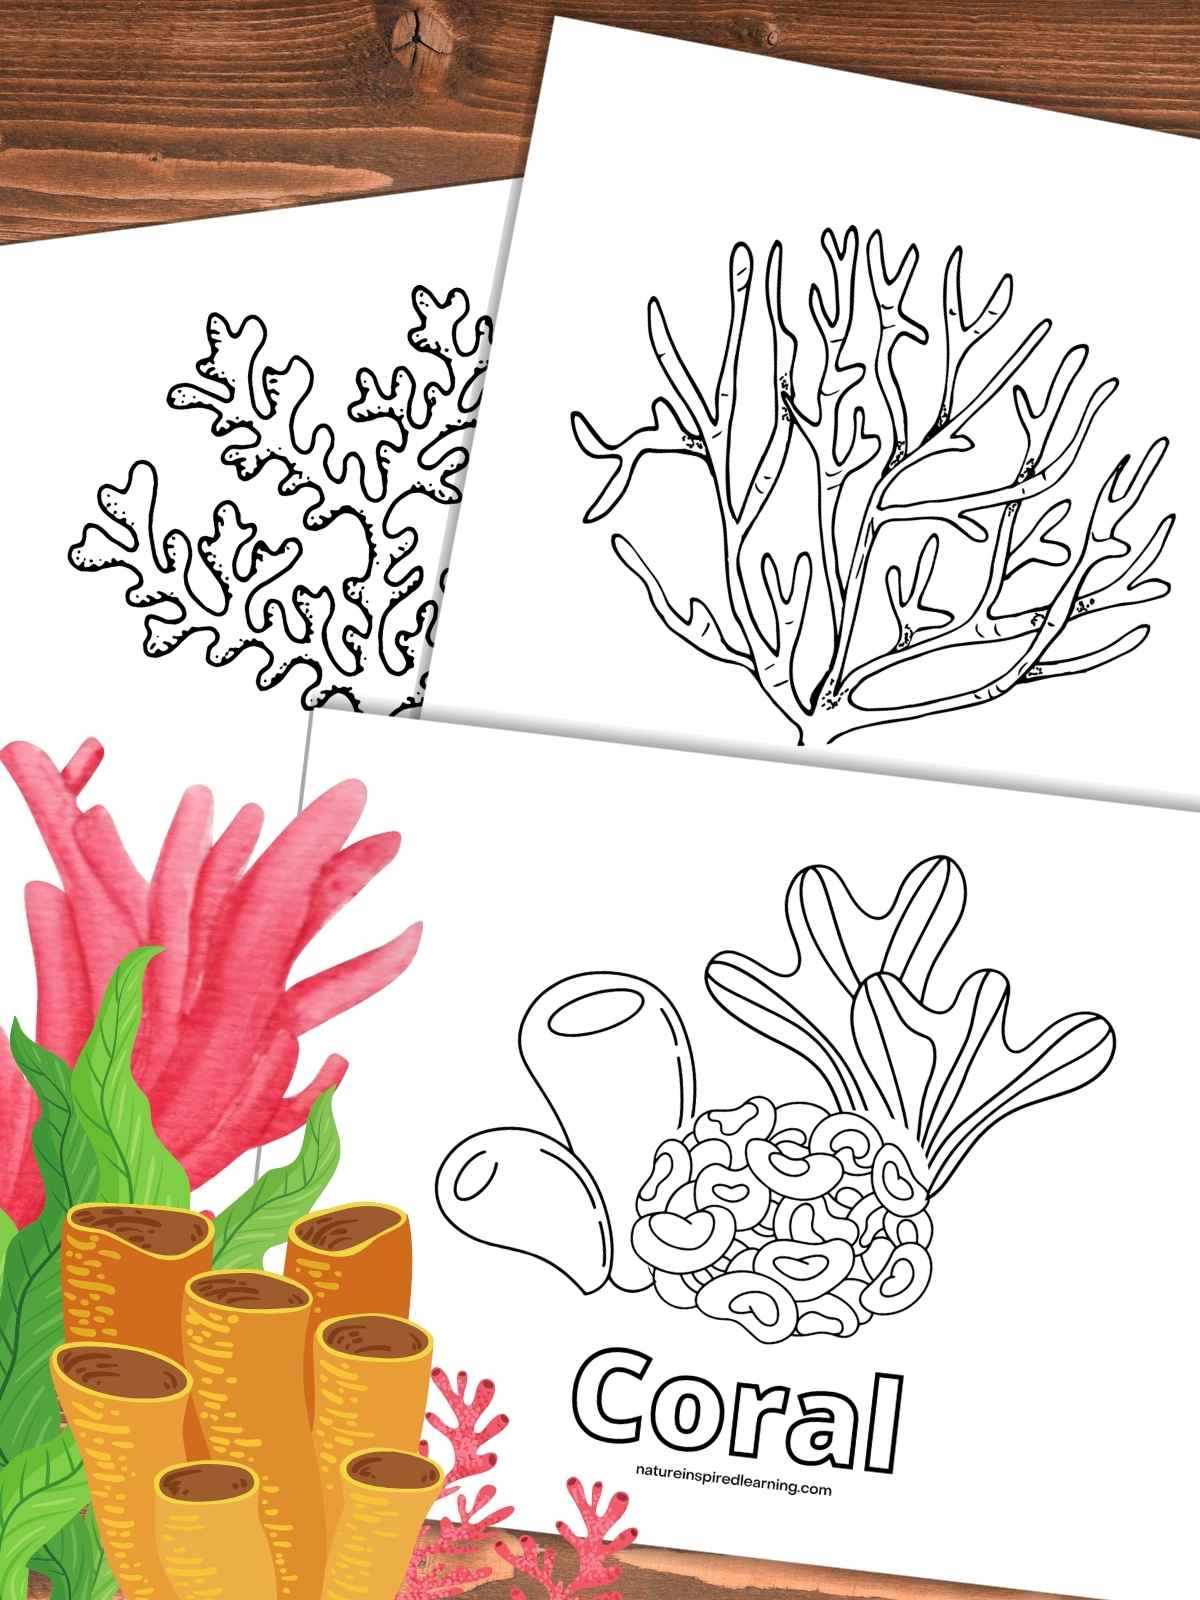 three coral coloring pages overlapping each other on a wooden background with colorful coral and seaweed bottom left